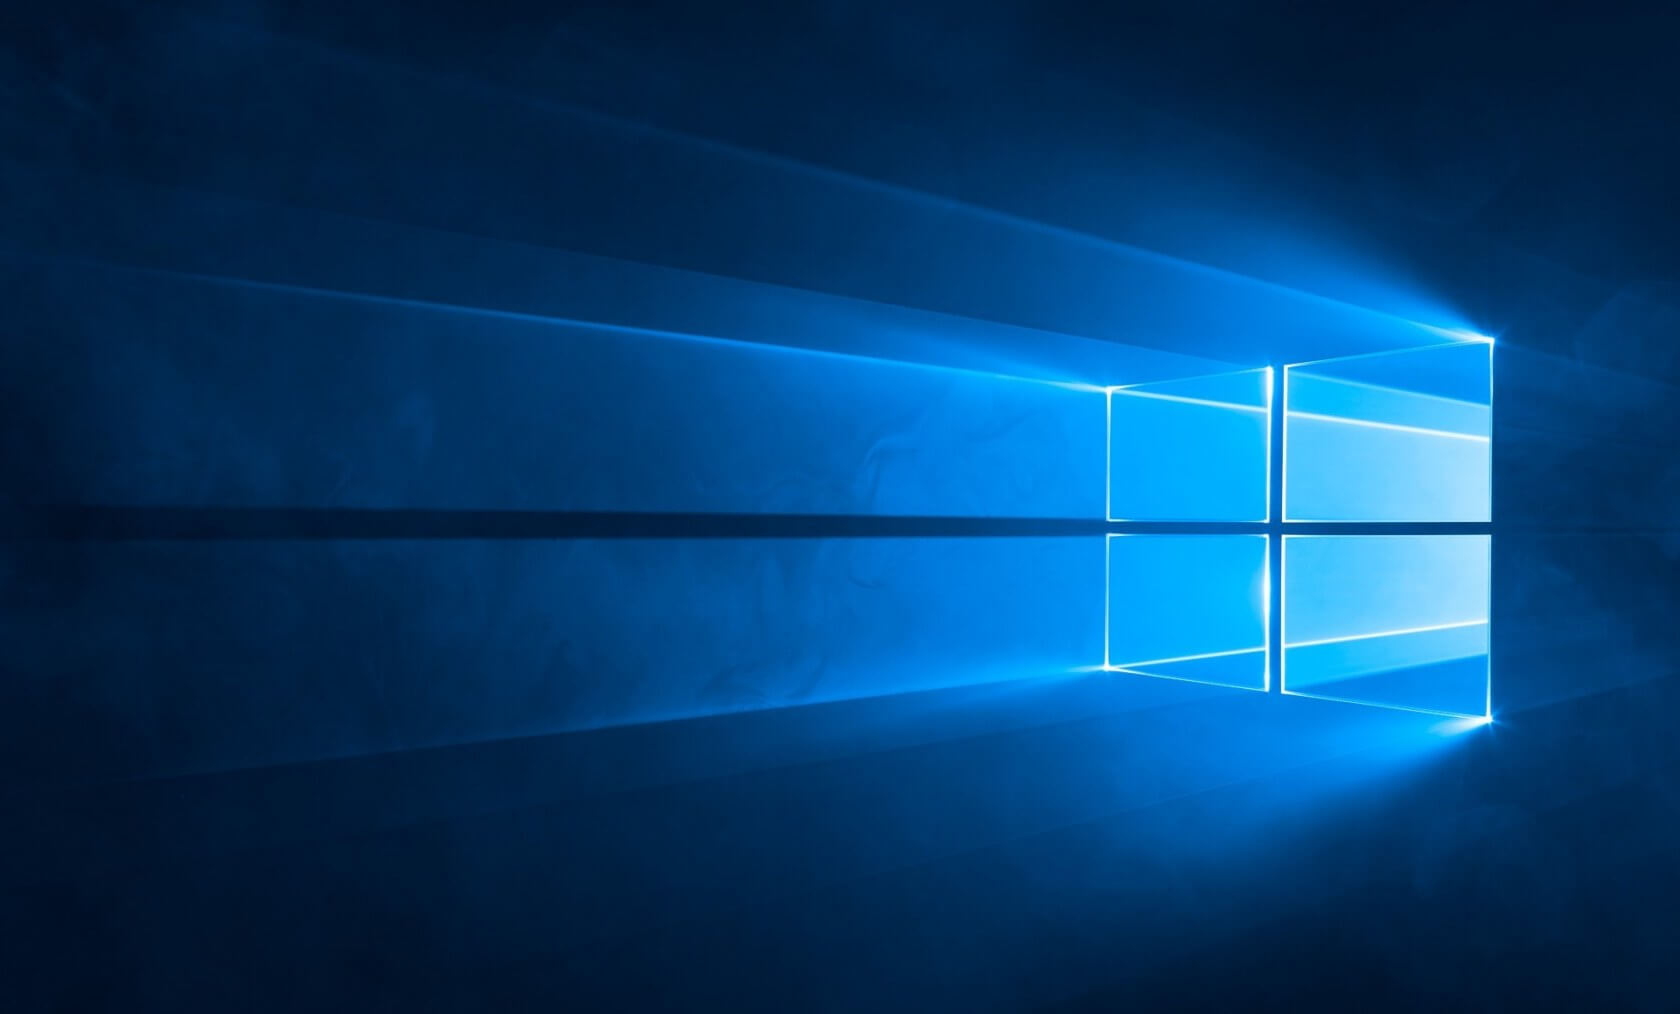 Microsoft's 'secured-core PC initiative' aims to protect Windows 10 machines from firmware attacks